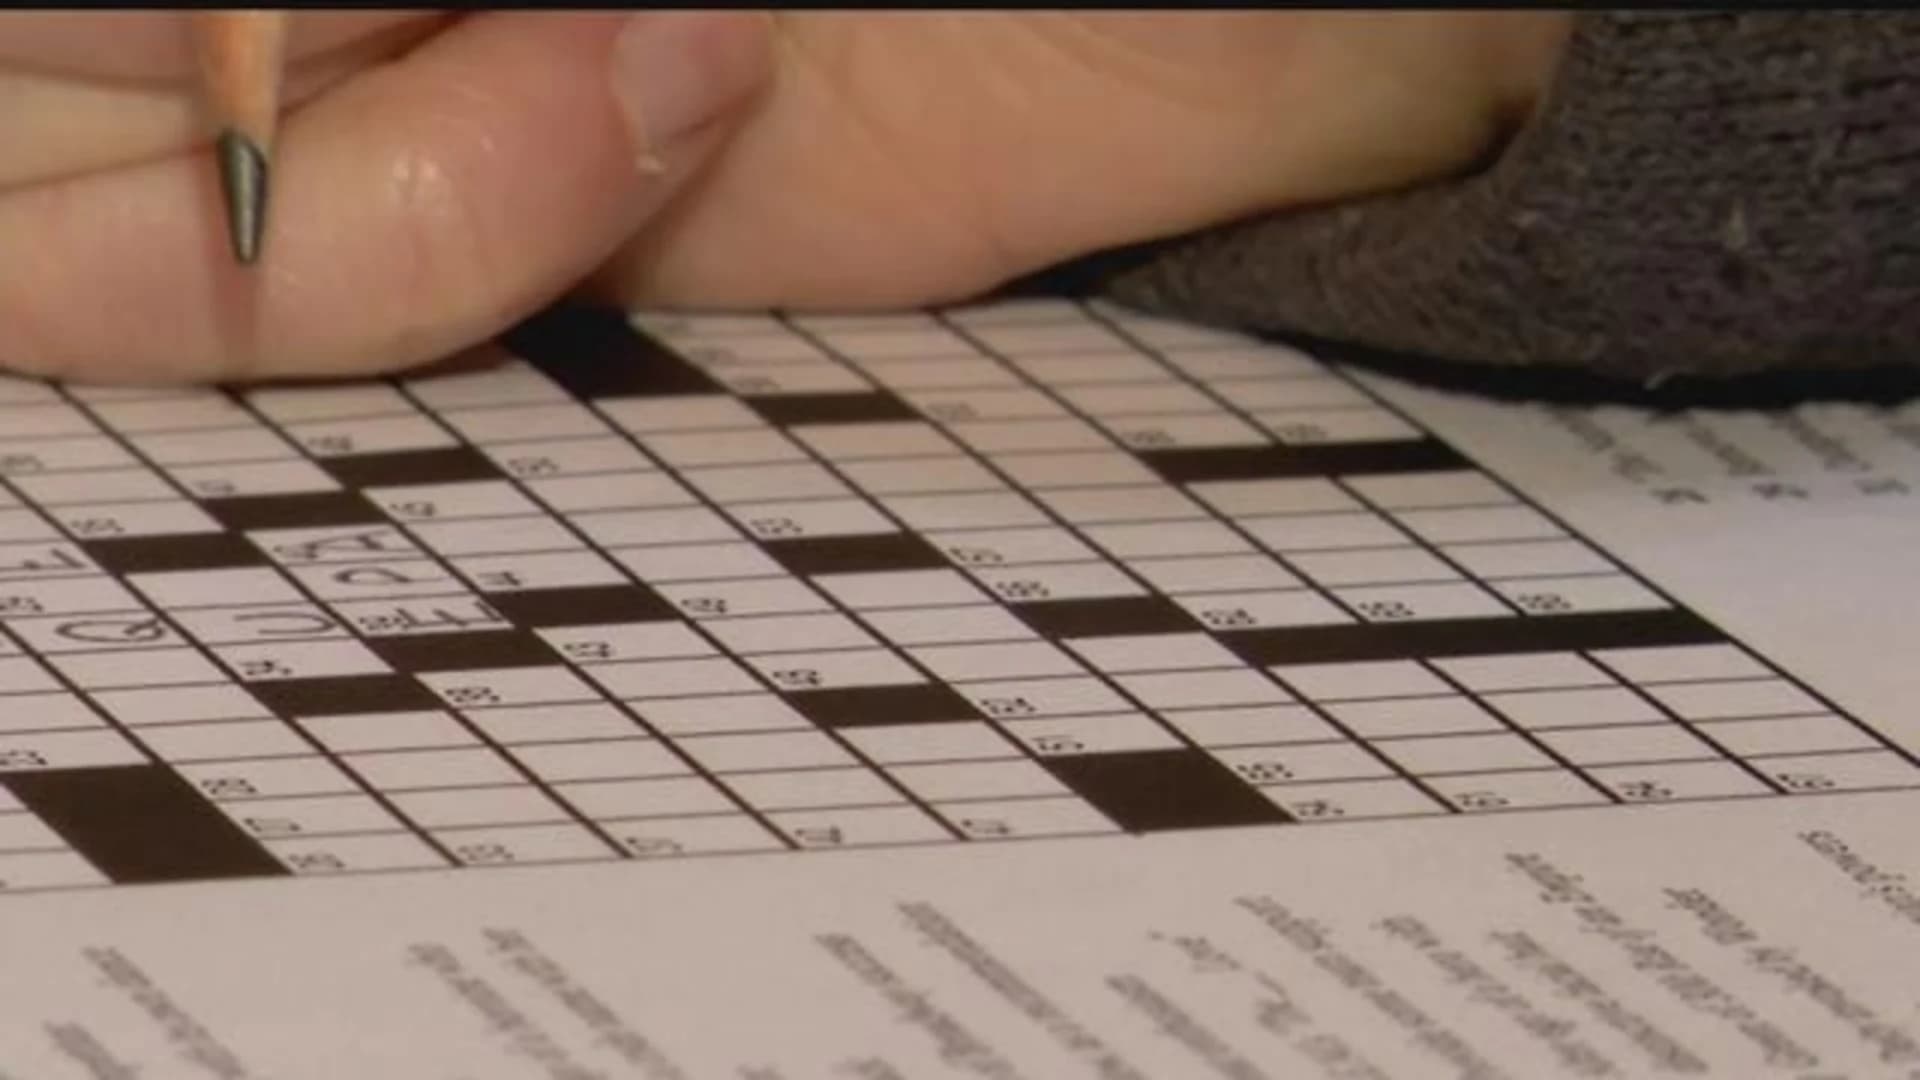 Stamford serves as crossroad for crossword puzzle lovers